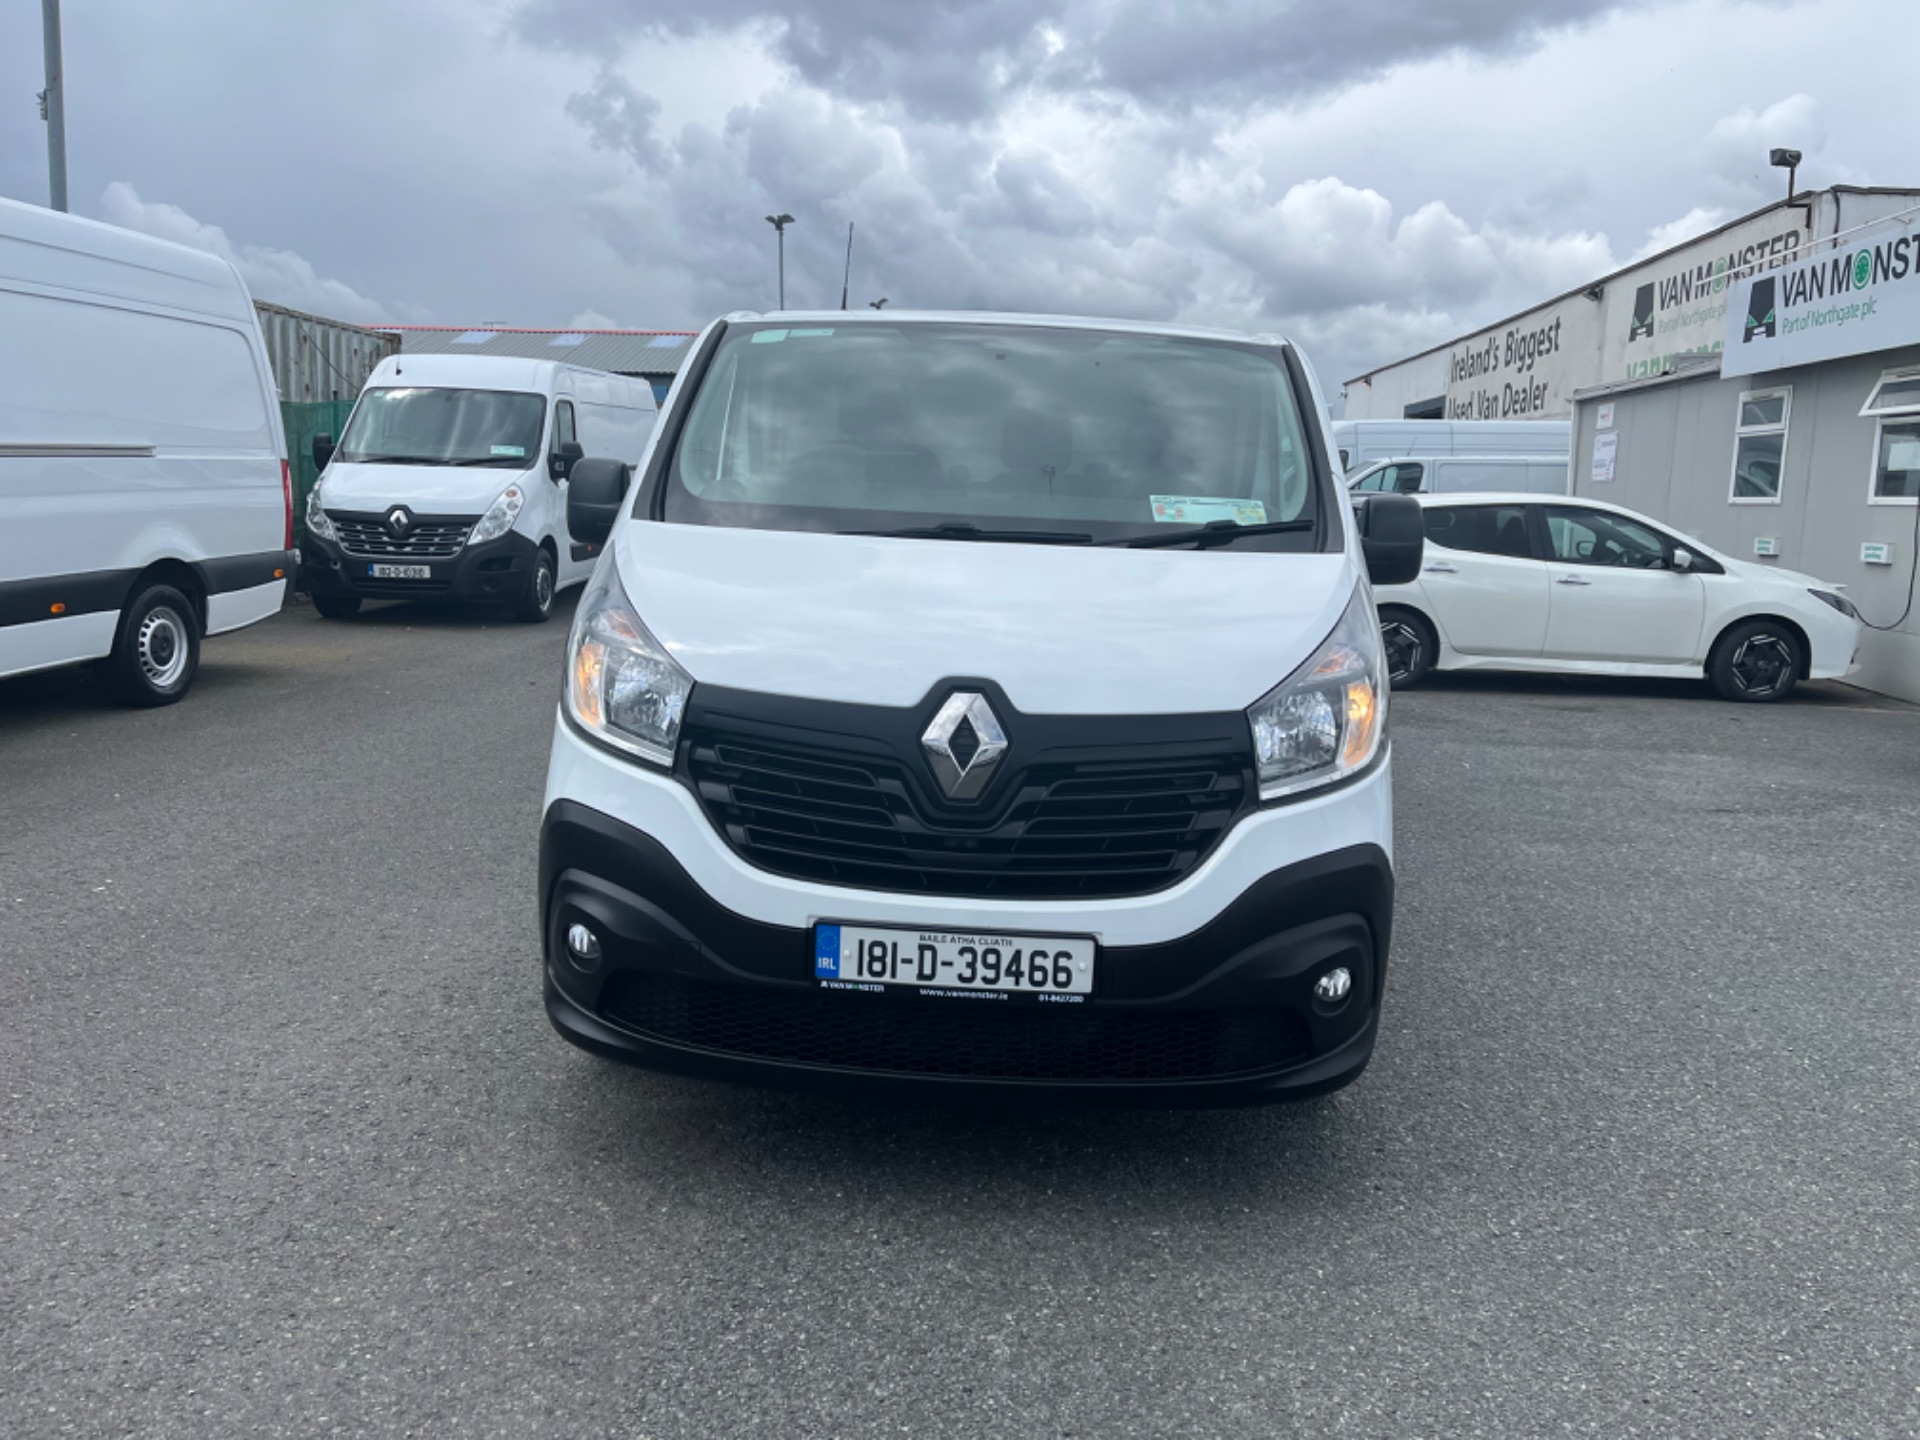 2018 Renault Trafic LL29 DCI 120 Business 3DR (181D39466) Image 13